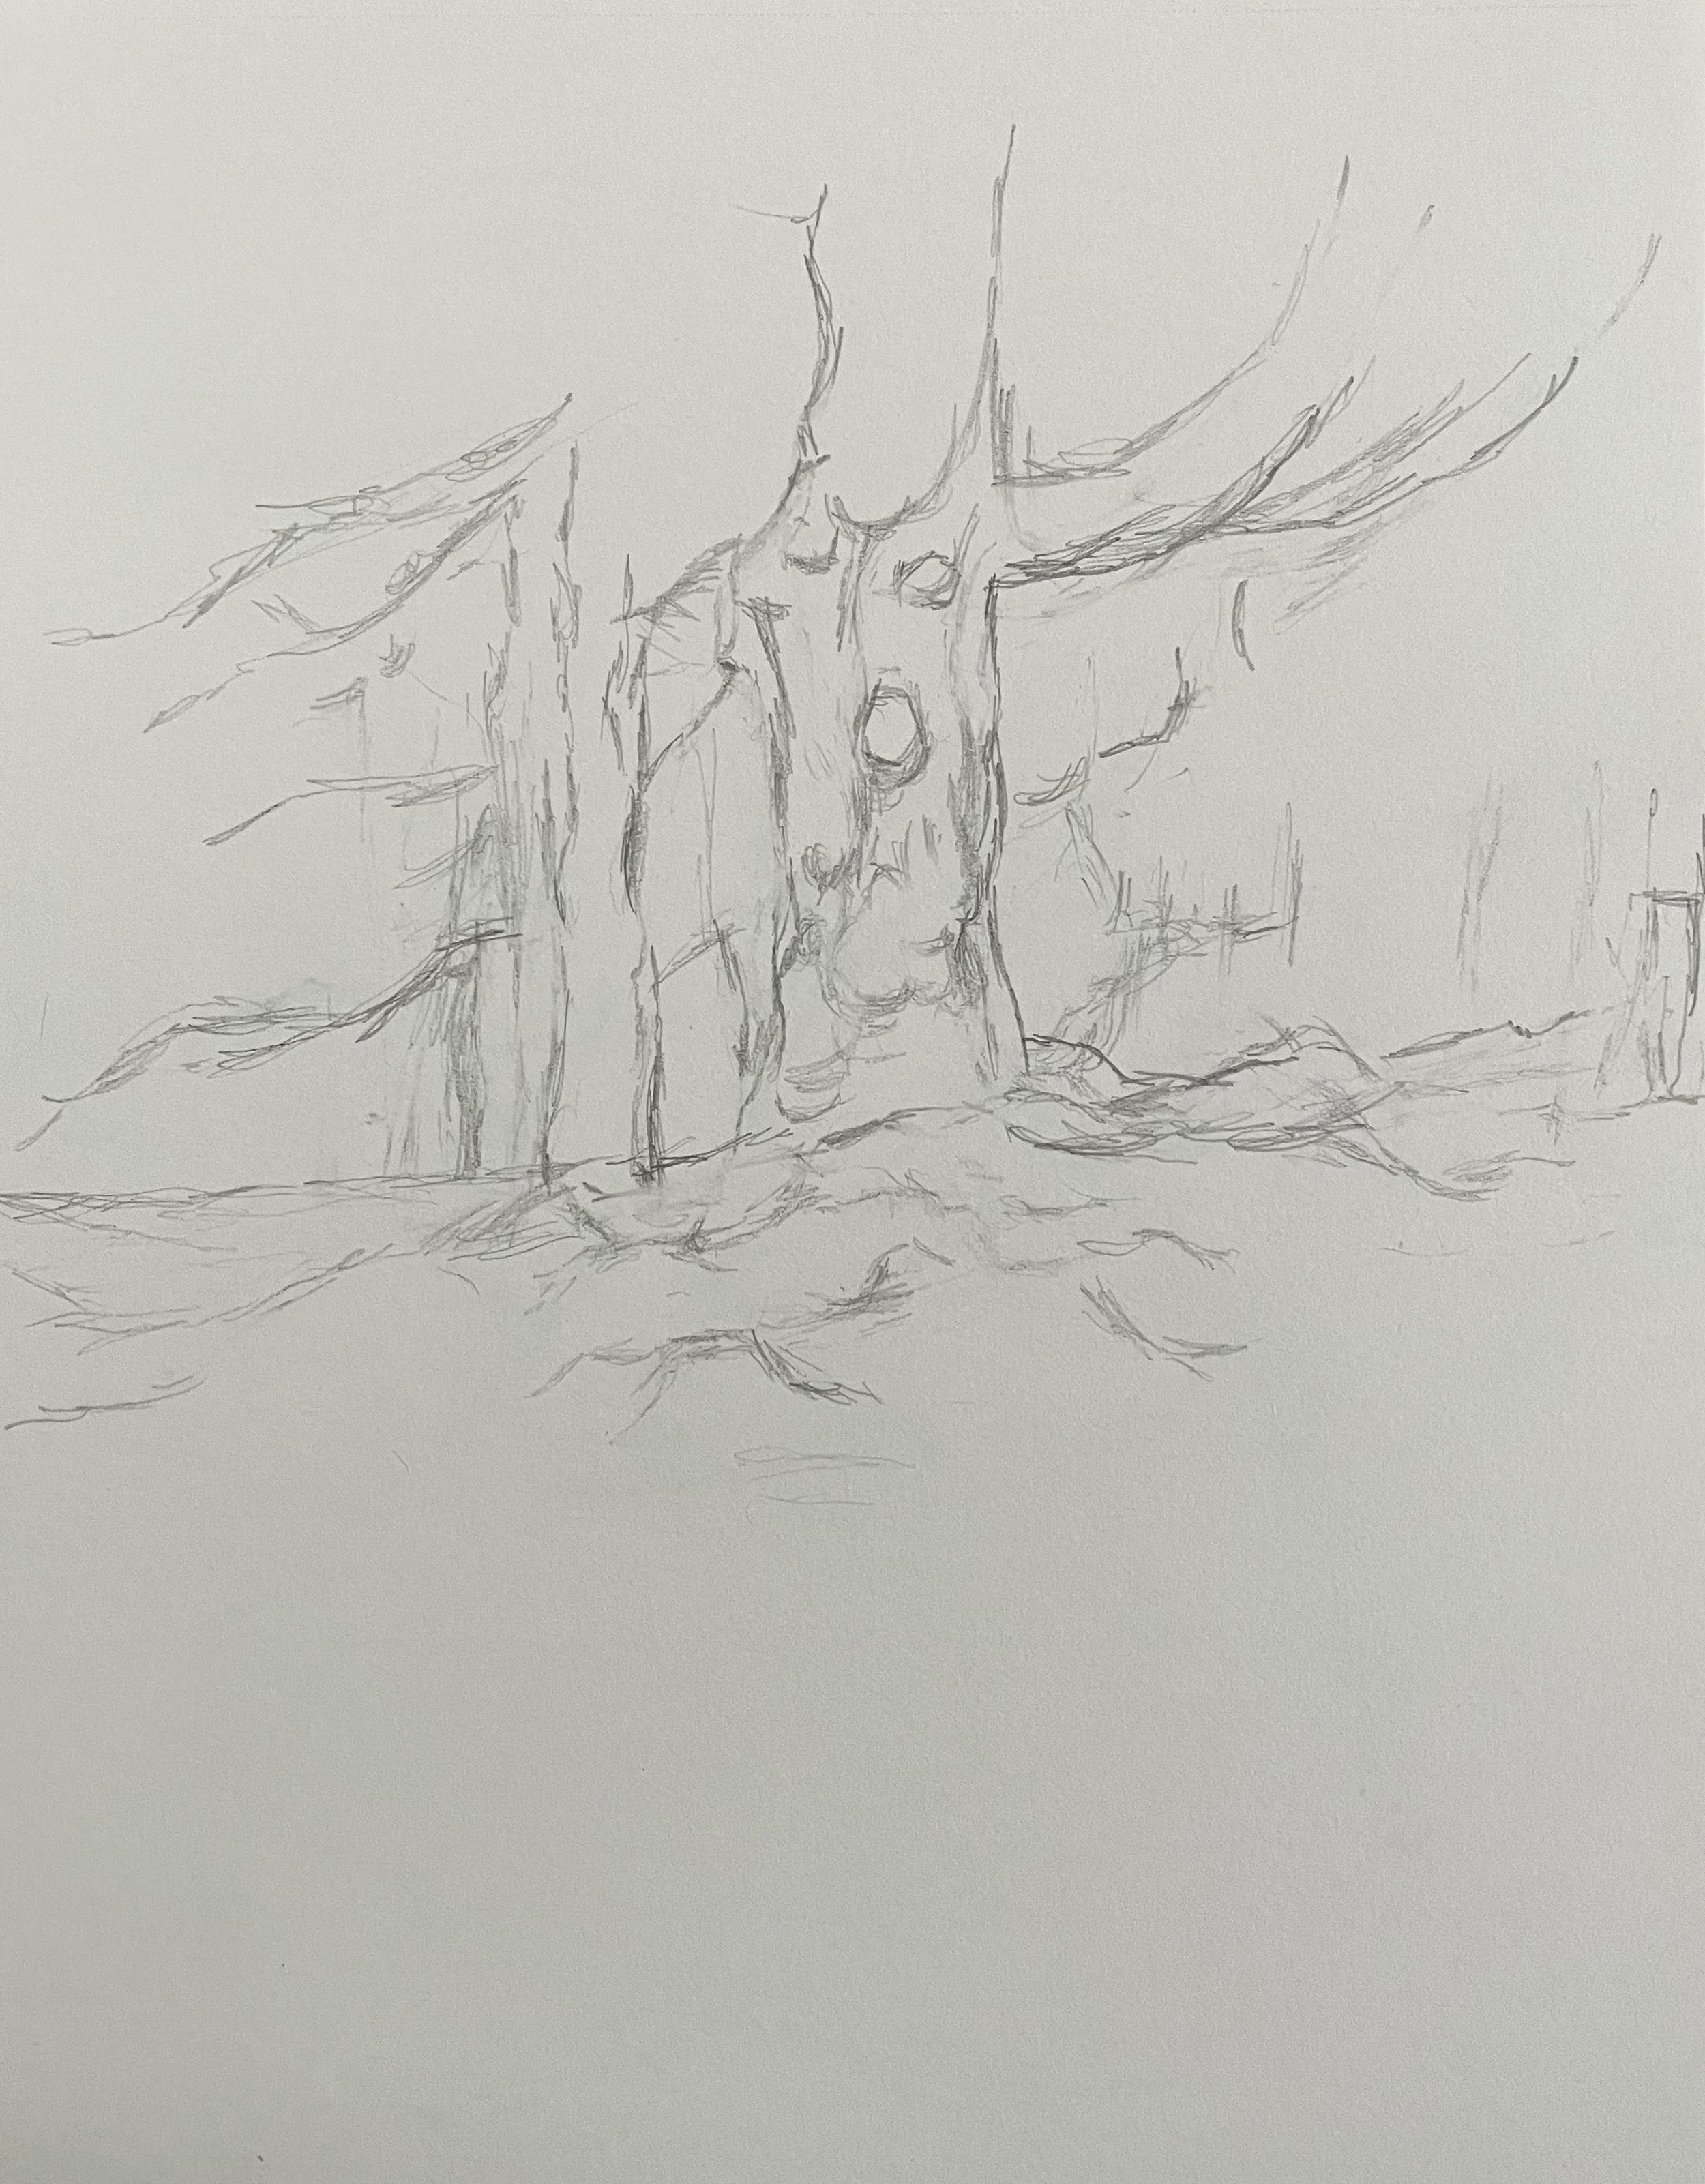   Father Tree , Pencil on Paper, 10x8 inches, 2022 